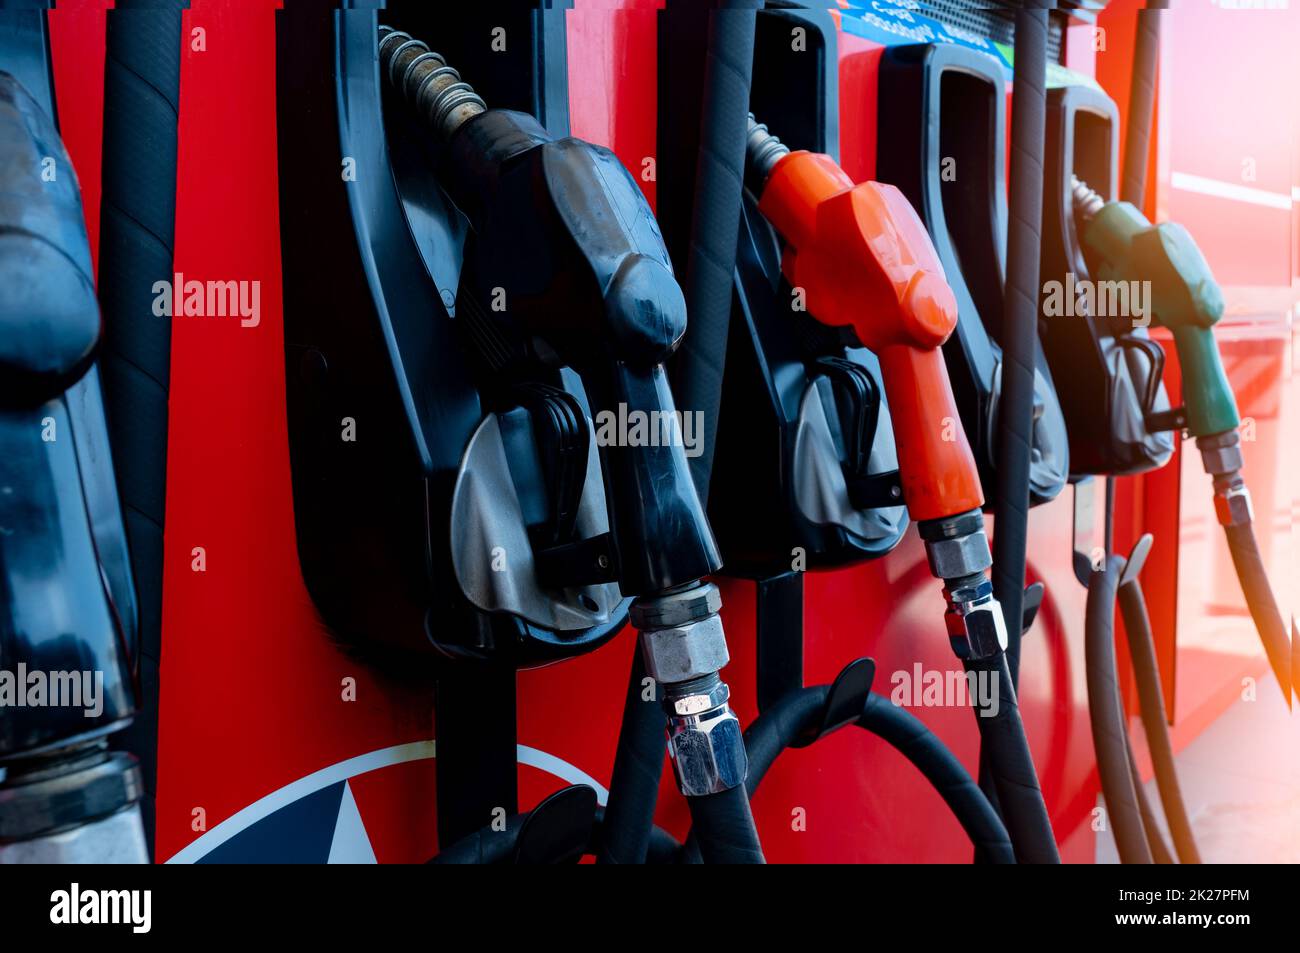 Gas pump nozzle in petrol station. Fuel nozzle in oil dispenser. Fuel dispenser machine. Refueling fill up with petrol gasoline and diesel. Petrol industry and service. Petroleum oil consumption. Stock Photo